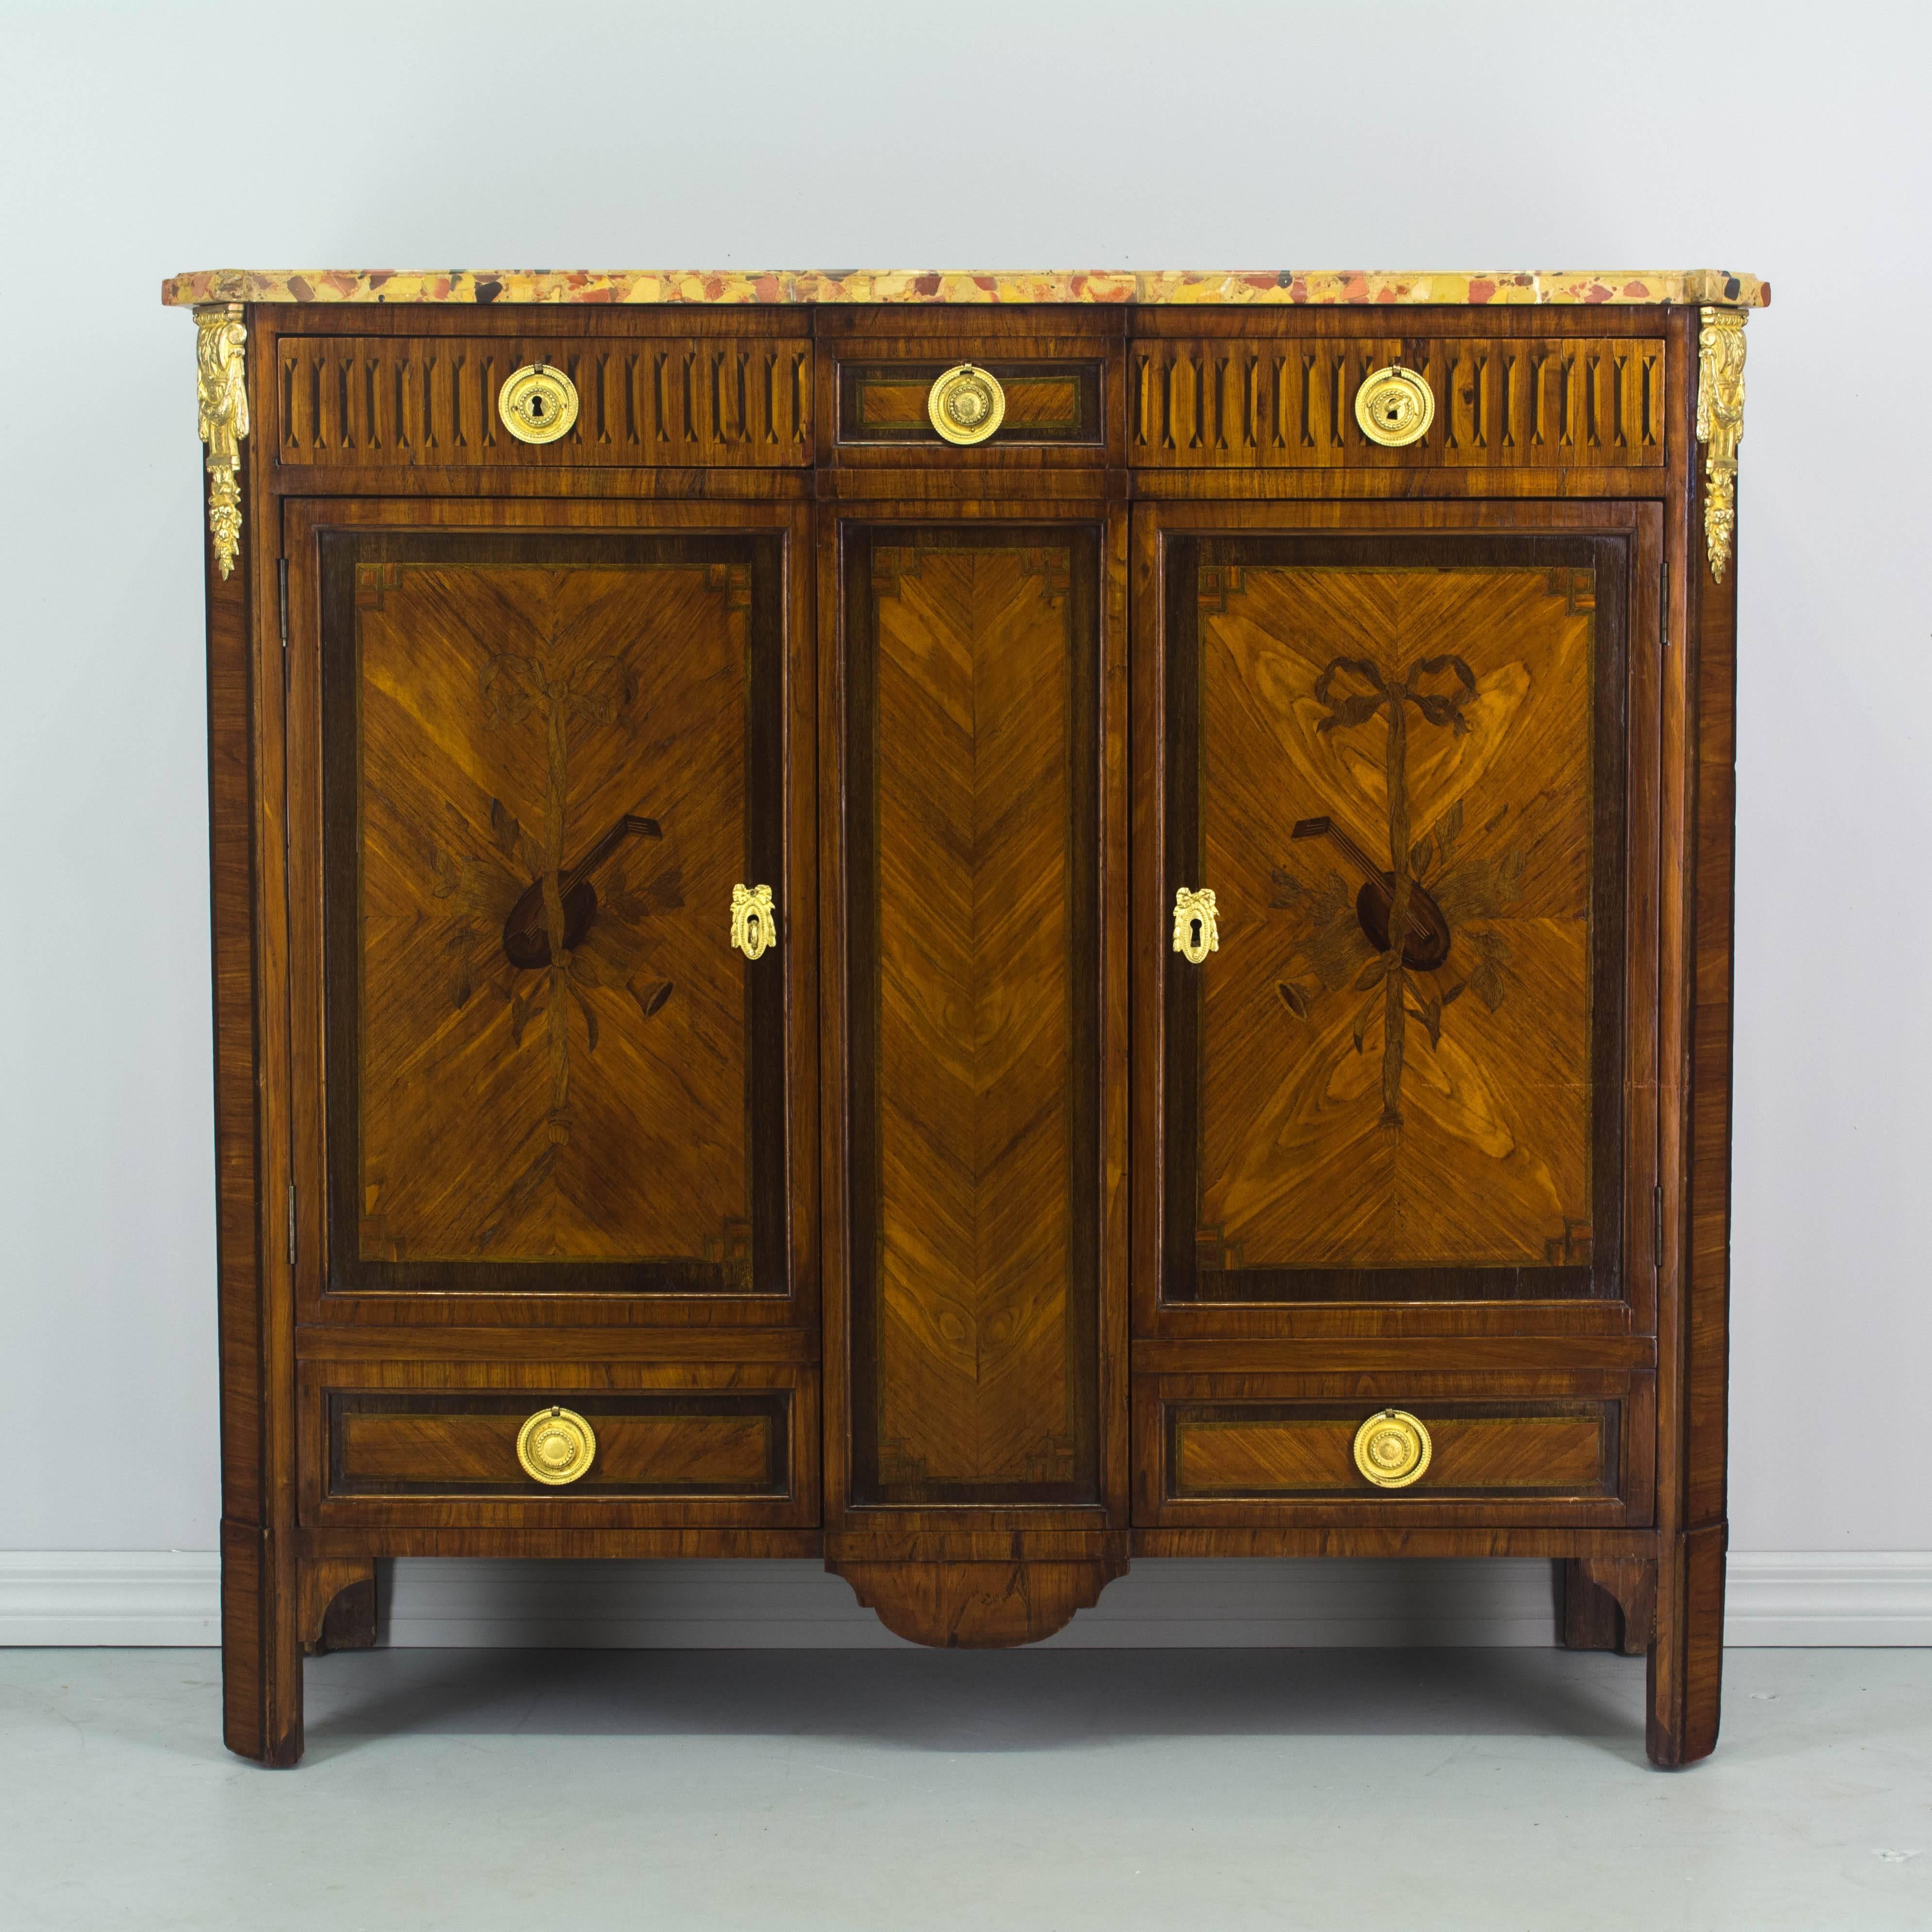 A 19th century Louis XVI style Parisian buffet with two dovetailed drawers and opening to two interior adjustable shelves. Fine marquetry work using various wood veneers including walnut, maple, and mahogany with oak as a secondary wood. French